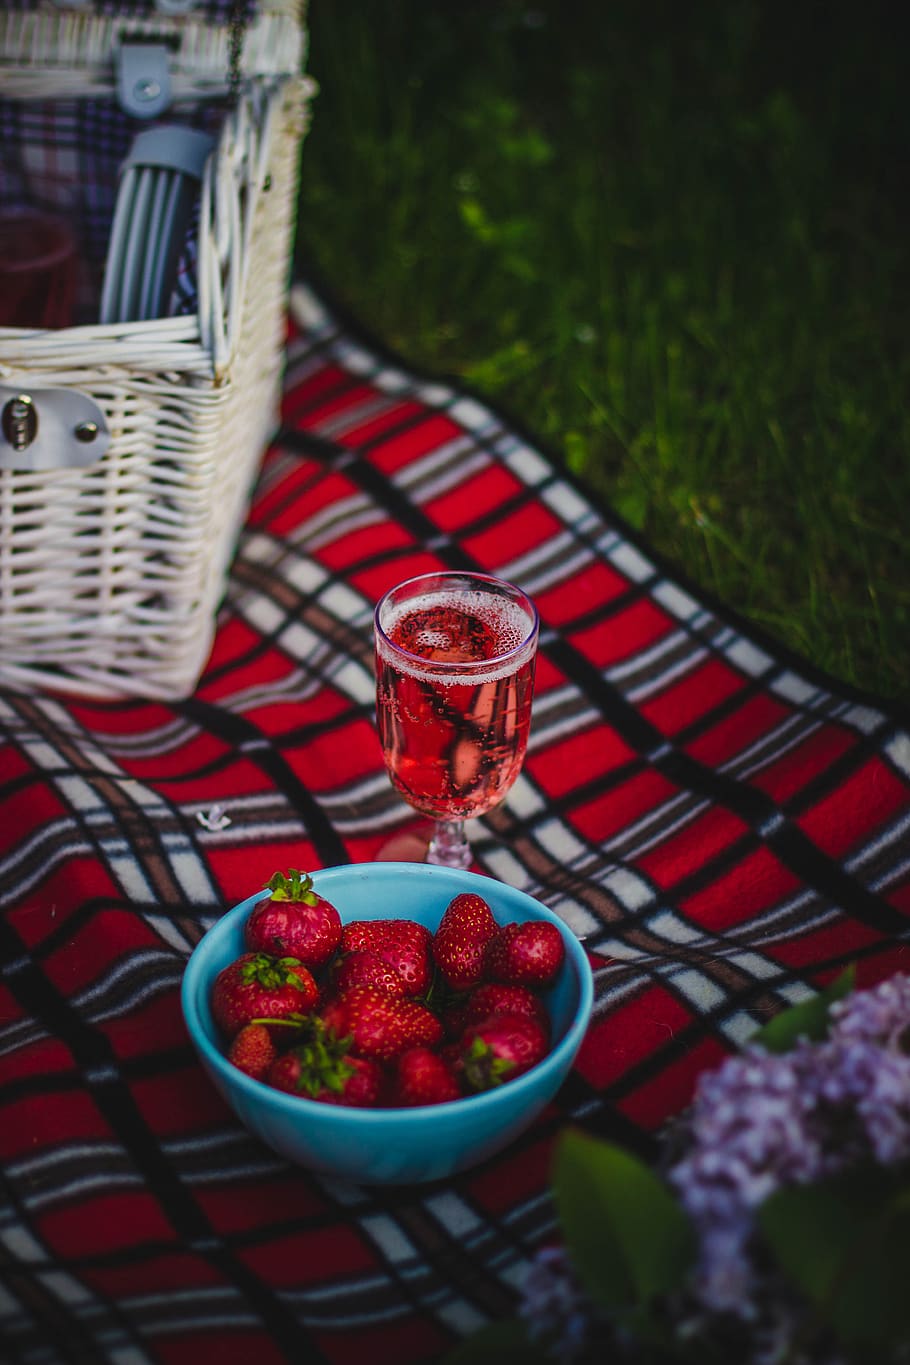 cloth, picnic, outdoor, travel, food, glass, drink, strawberry, fruit, basket